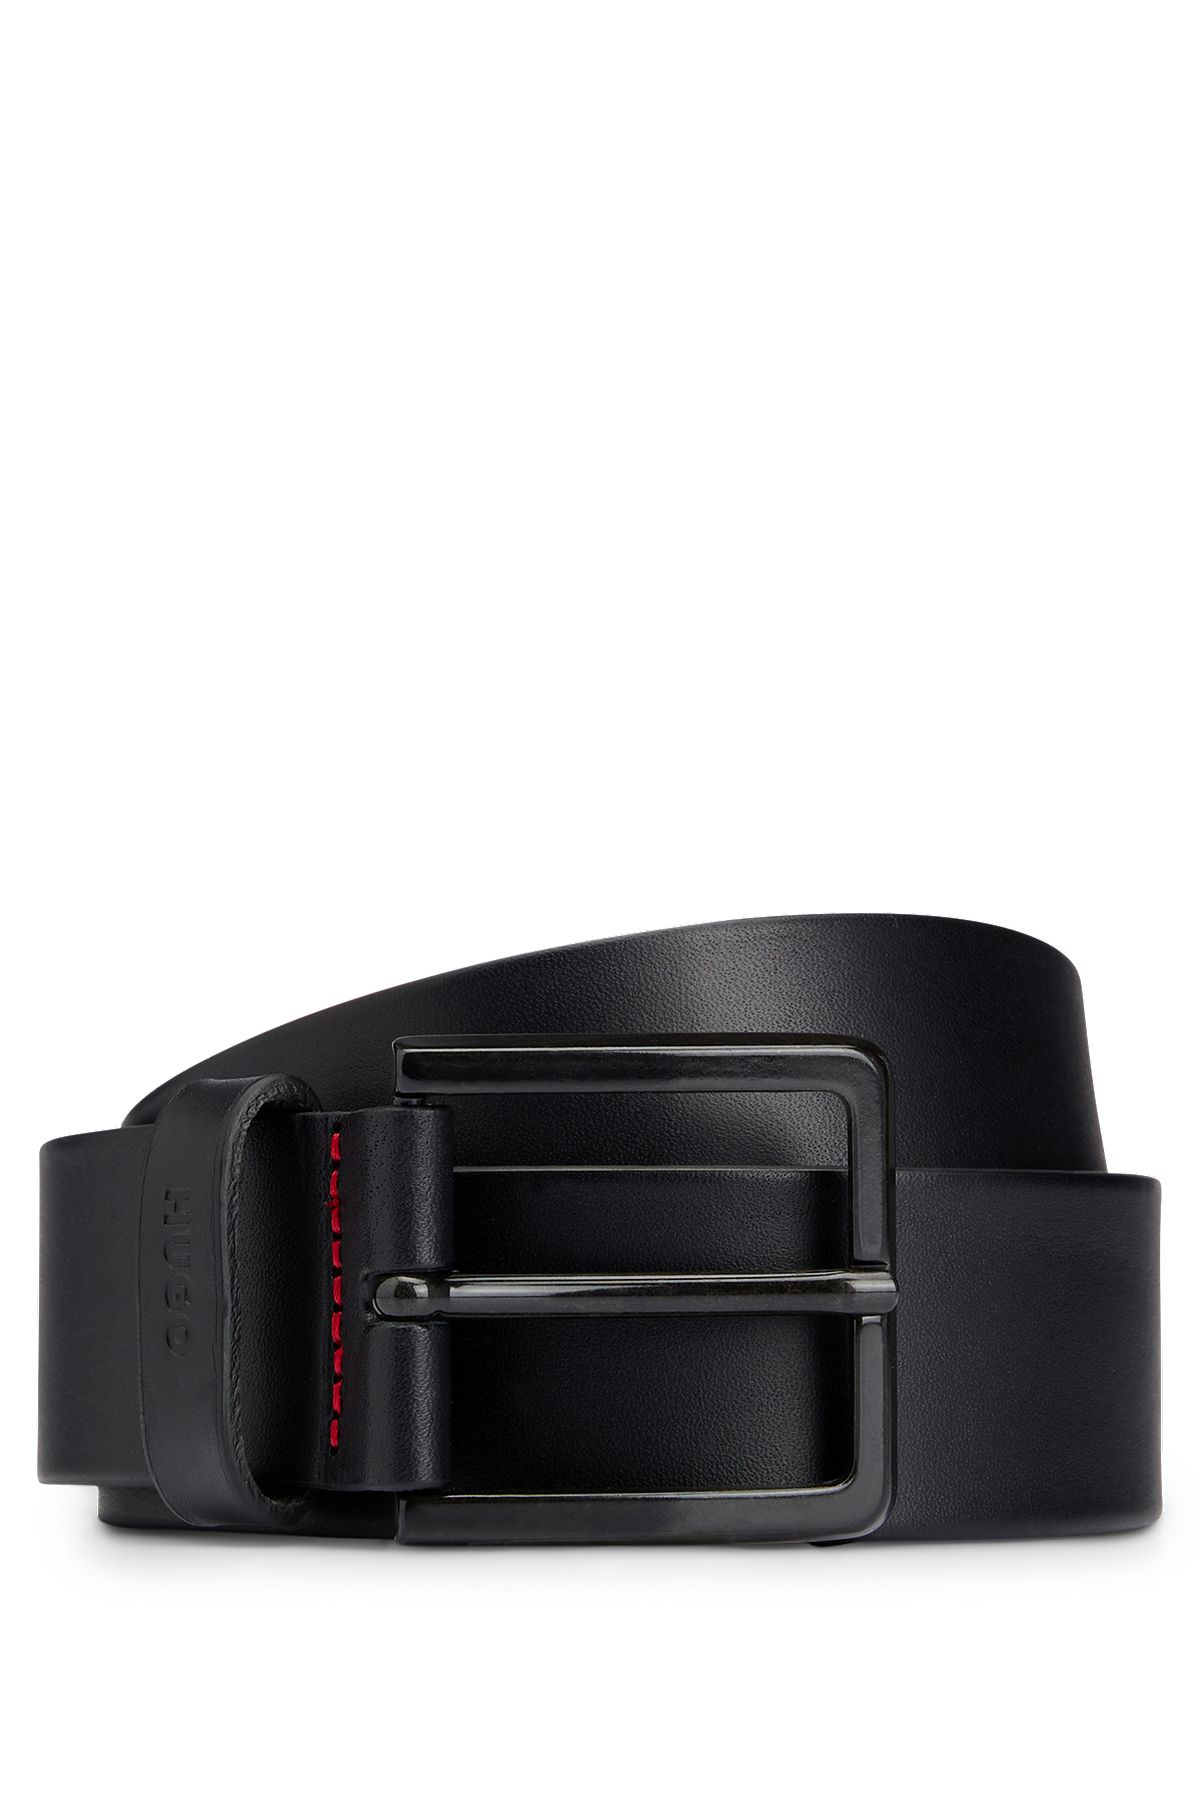 No. 5 Leather Cinch Belt - Italian Bridle Leather - Black Leather with Stainless Steel, Large - Fits Sizes 34 - 42